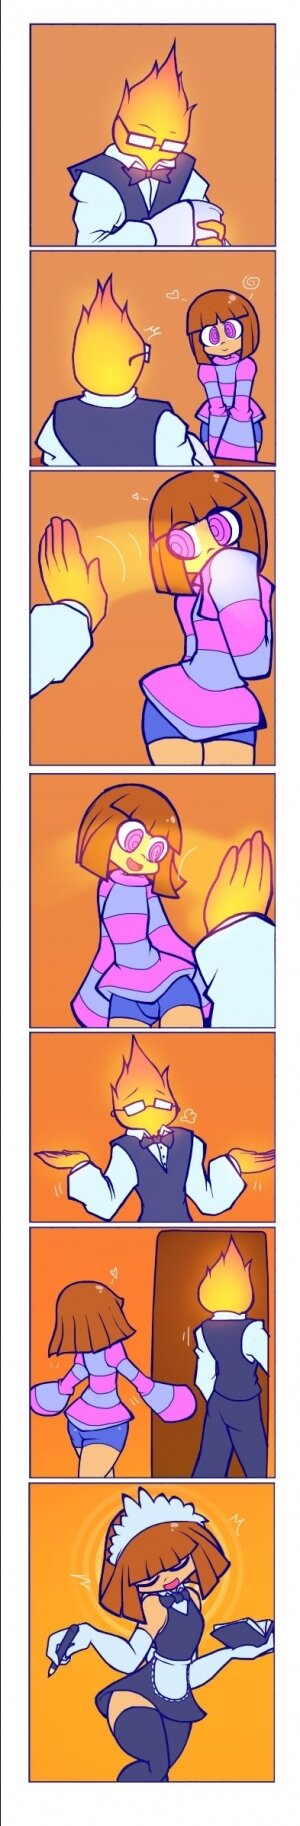 Frisk collection - evenytron - Page 7